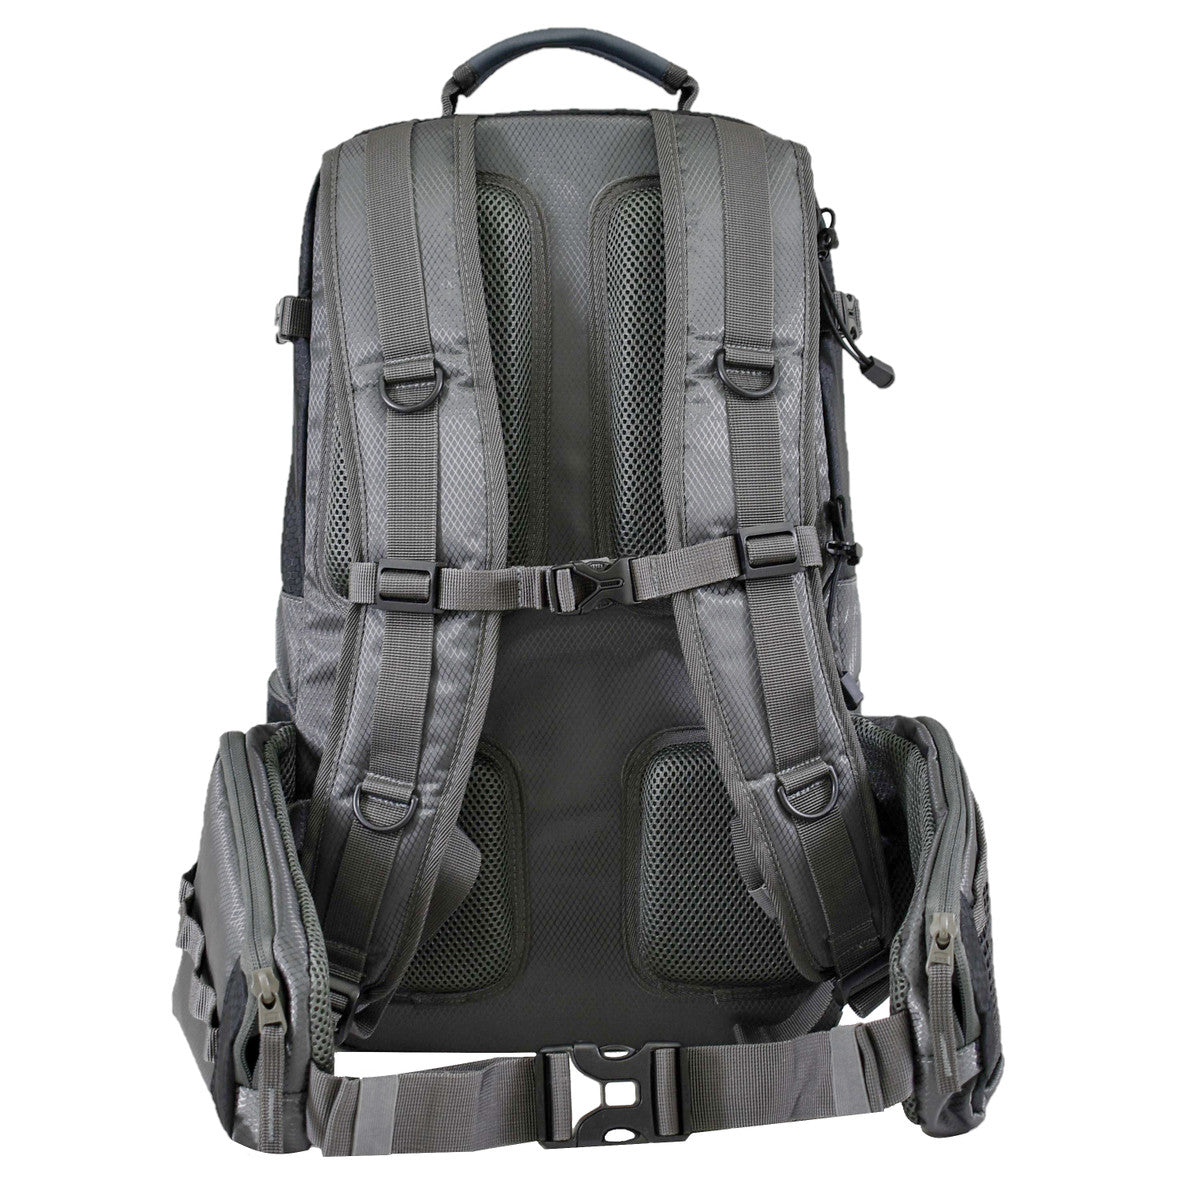 Frogg Toggs - i3 Tackle Backpack